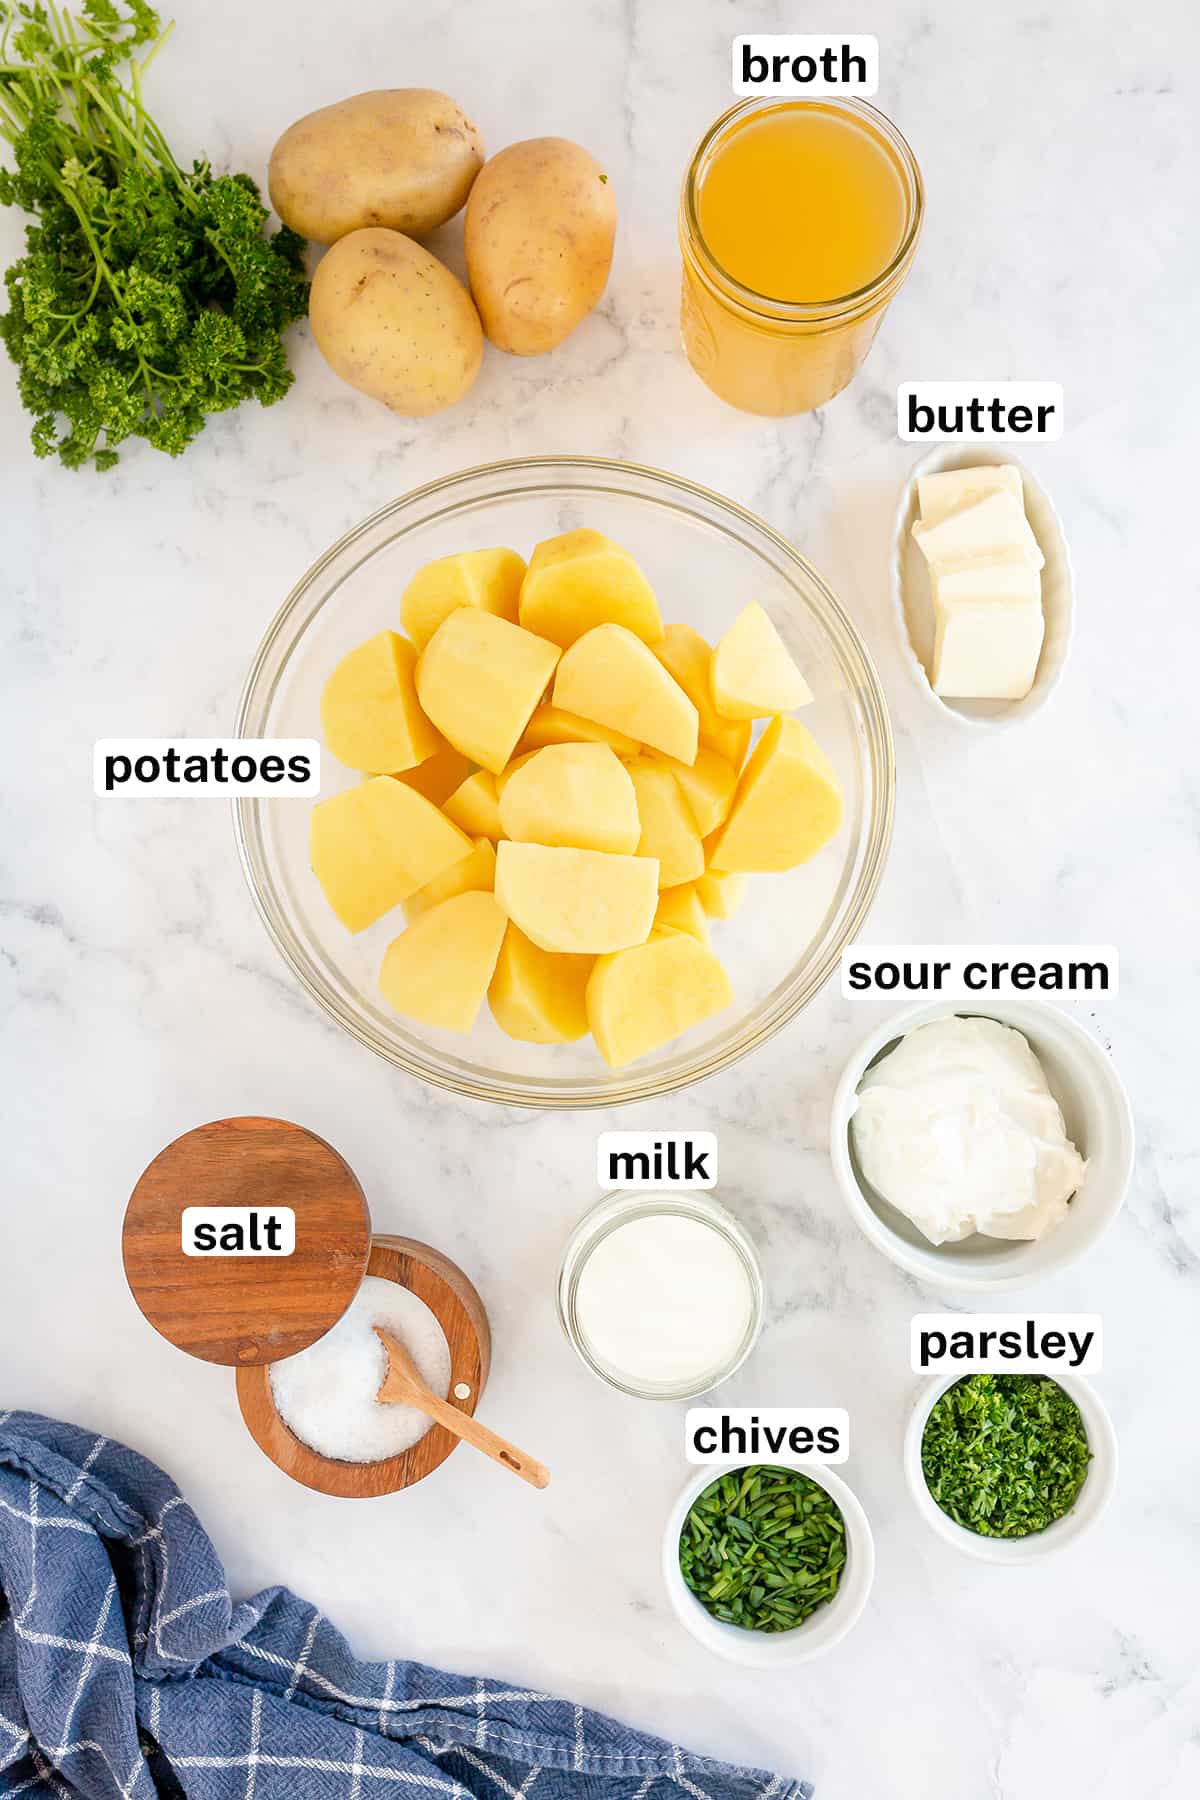 Gold potatoes, sour cream and other ingredients to make Sour Cream Mashed Potatoes.